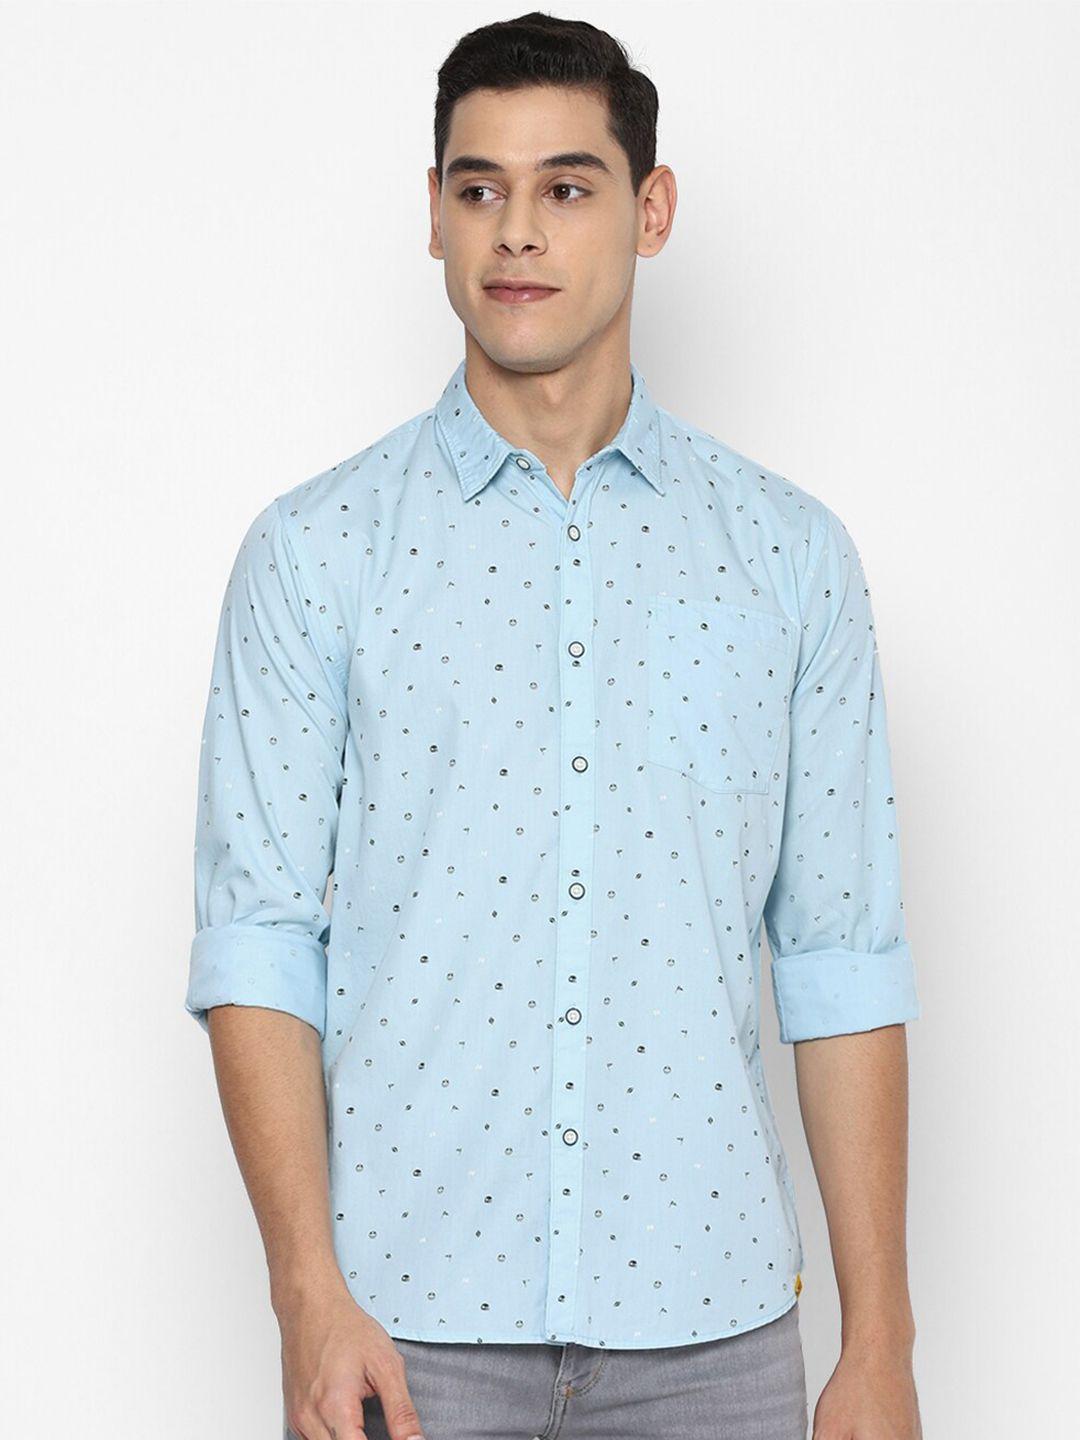 forever-21-men-blue-slim-fit-opaque-printed-casual-shirt